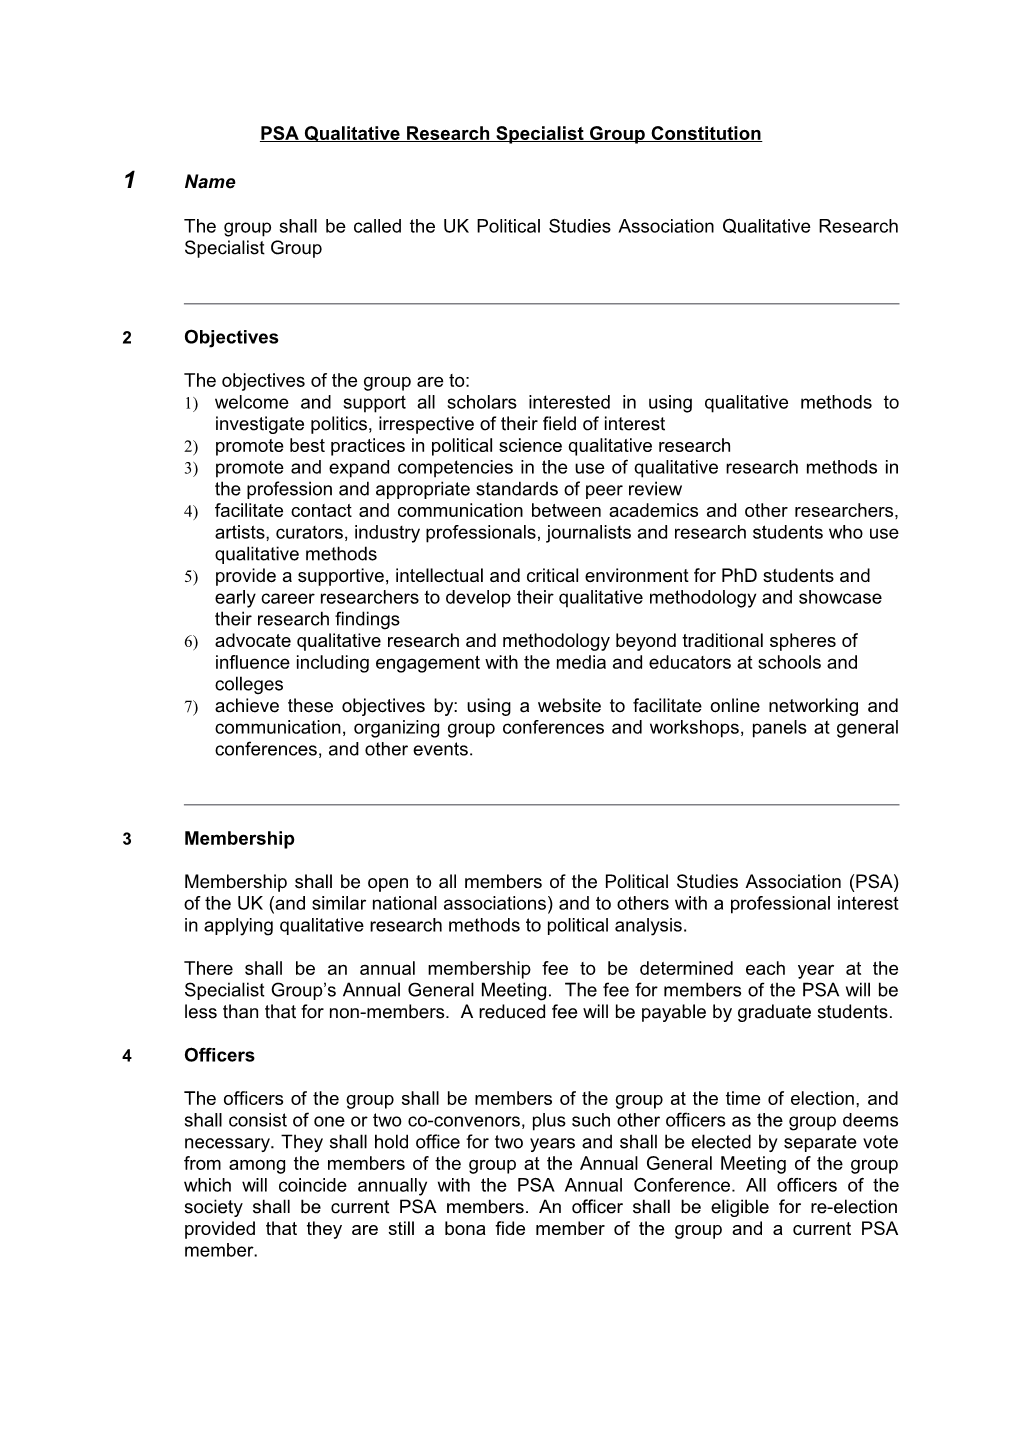 PSA Qualitative Research Specialist Group Constitution